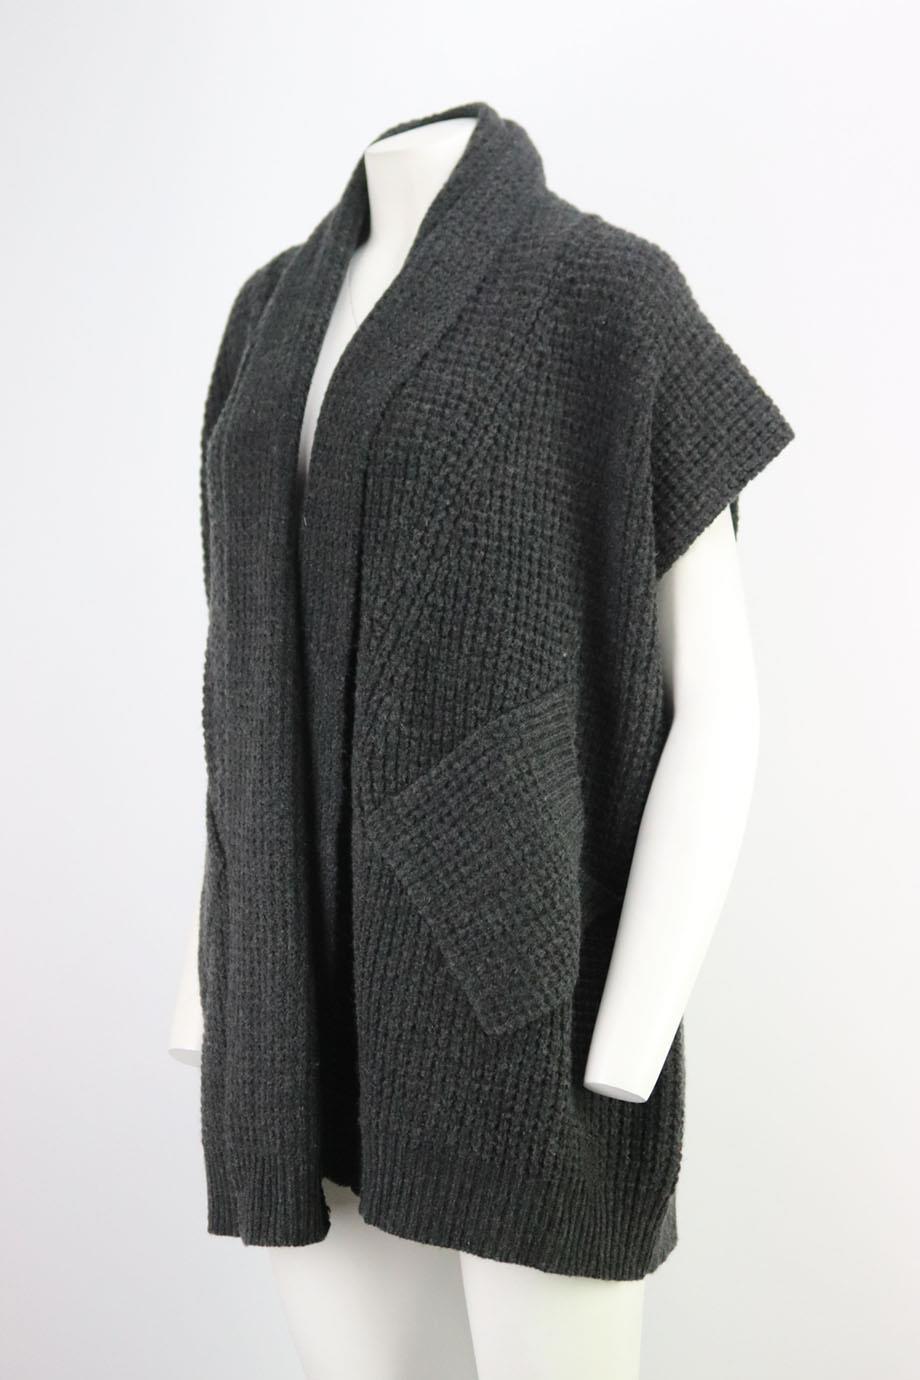 This 'Confidante Royal' cardigan by Eres is crafted in a tactile waffle-knit that combines soft wool with luxurious cashmere. Grey cashmere. Slips on. 70% Wool, 30% cashmere. Size: Small/Medium (UK 8/10, US 4/6, FR 36/38, IT 40/42). Bust measures